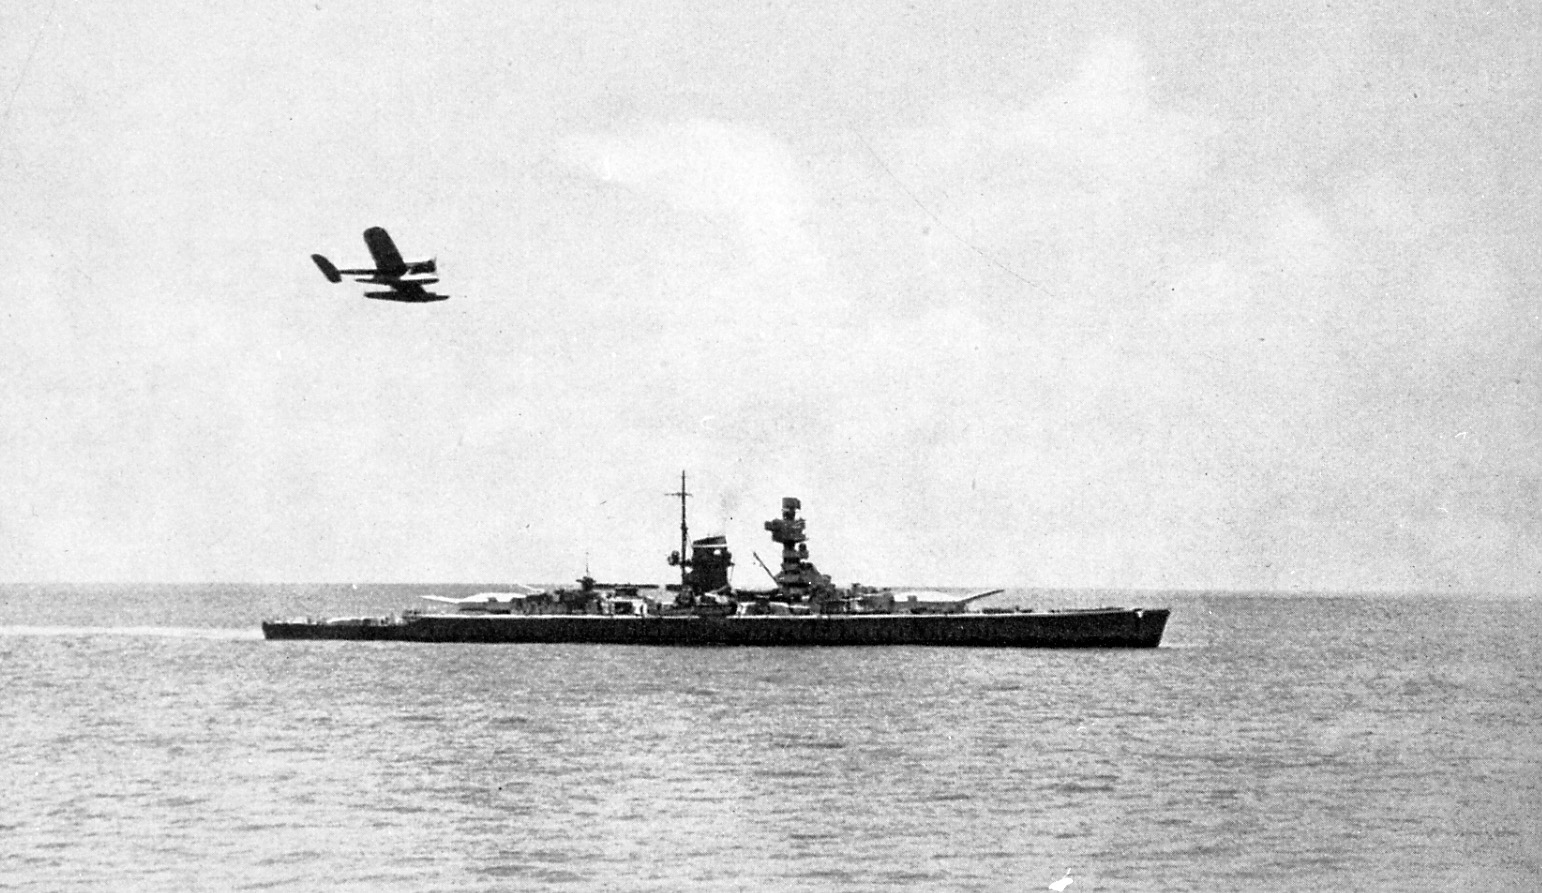 The Scheer steams ahead, while its Arado float plane flies above. The Arado performed aerial reconaissance duties for the surface raider.   